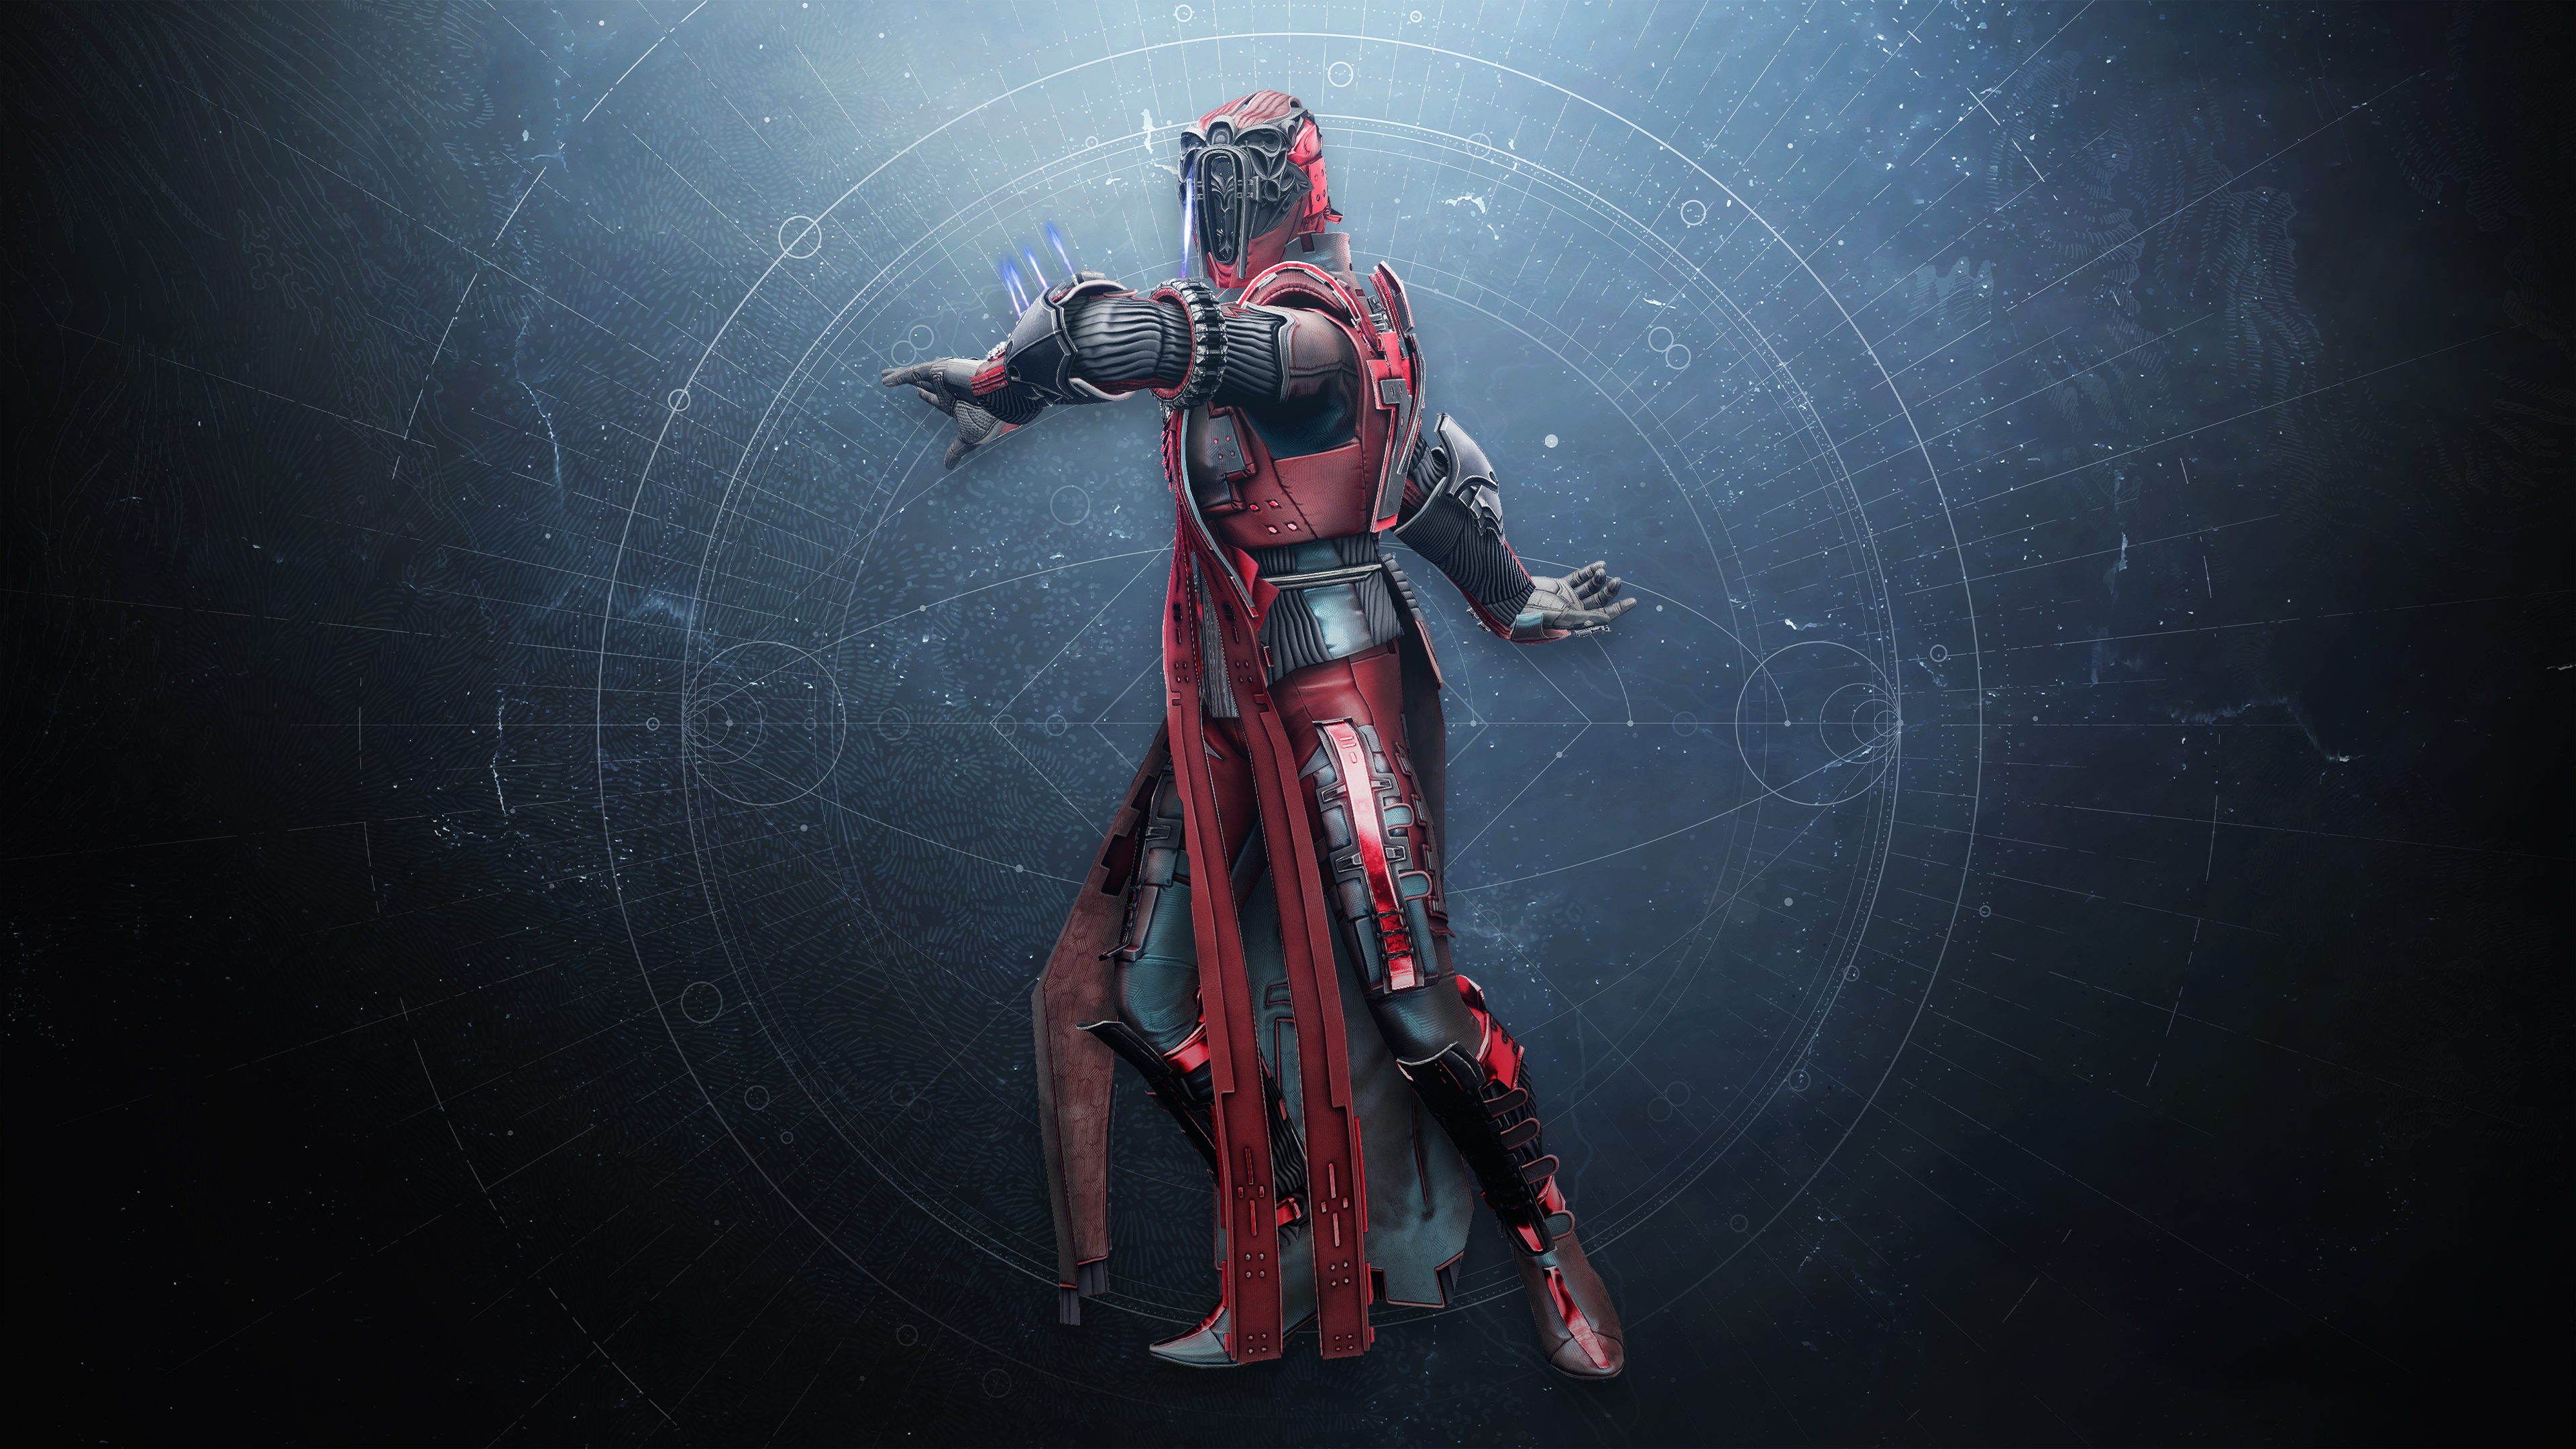 Guardians of Destiny 2: Eclipse will be able to “dance the flamenco”